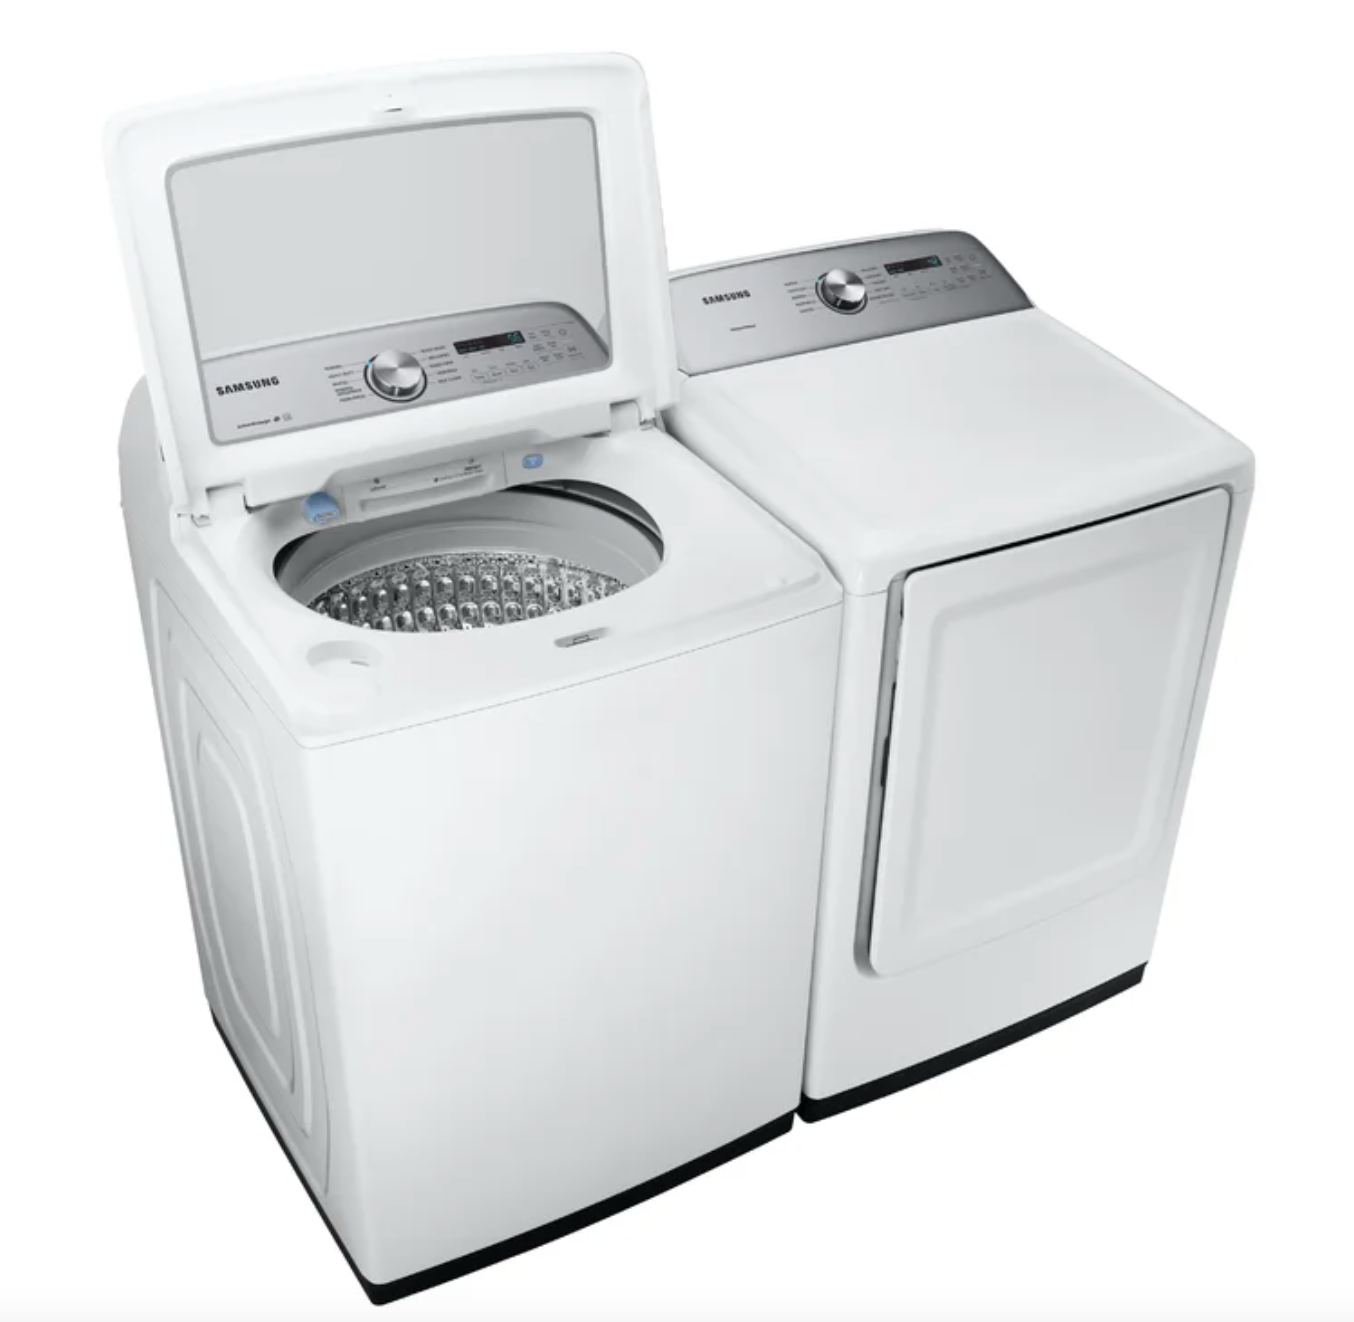 Samsung 5 Cubic Feet Washer And 7.4 Cubic Feet Dryer